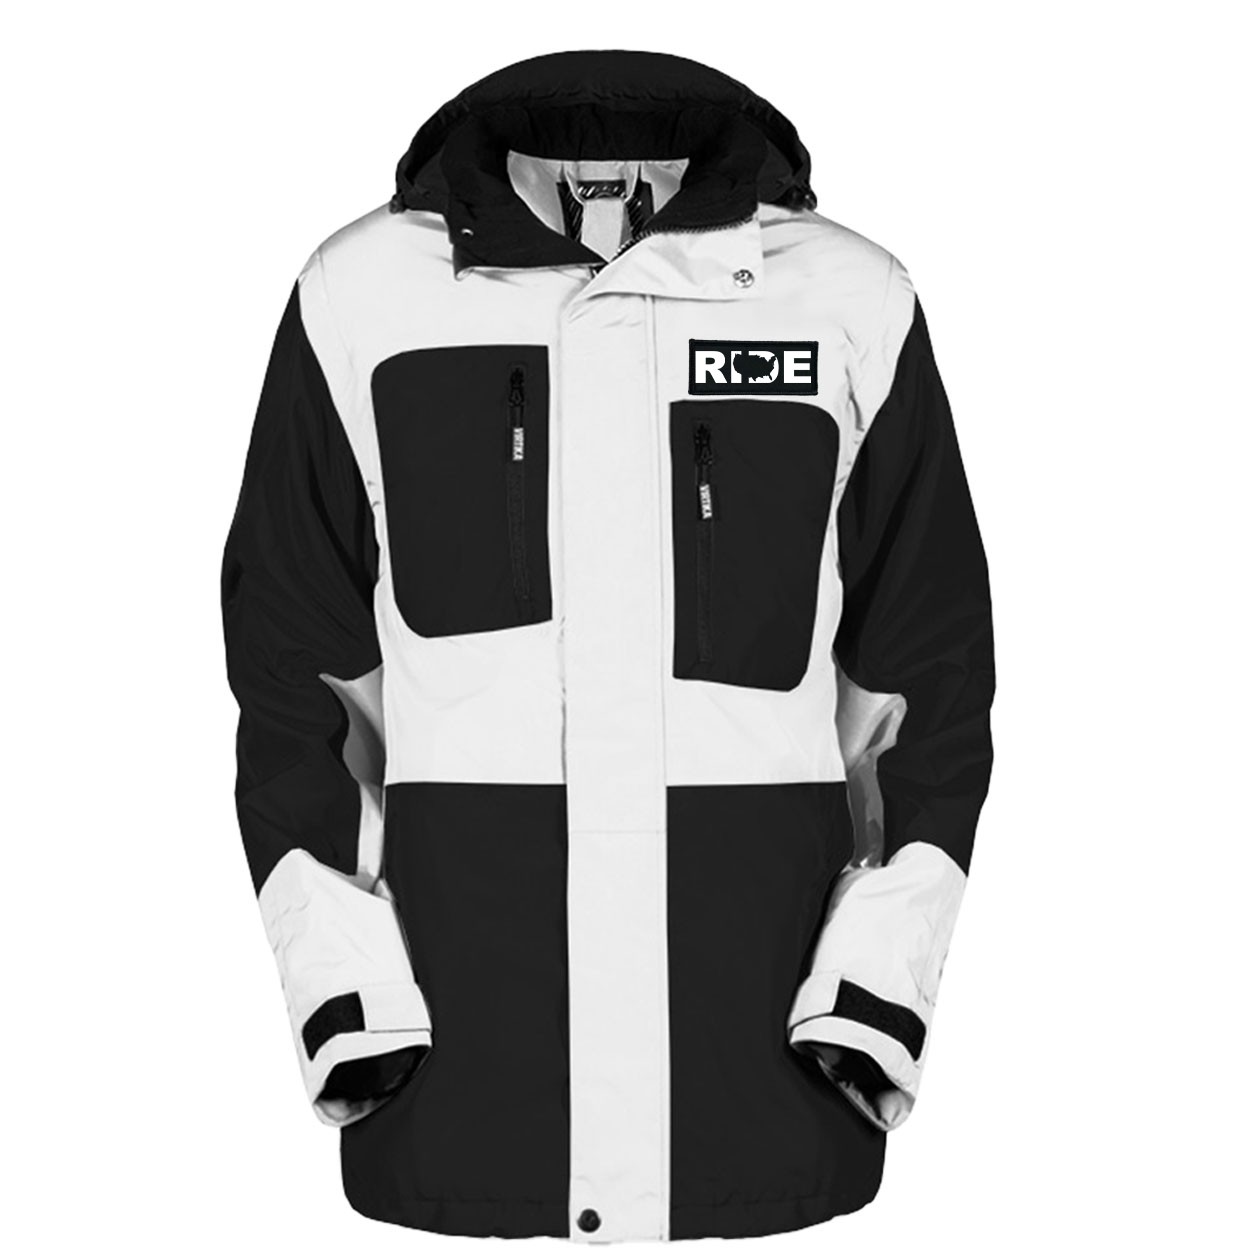 Ride United States Classic Woven Patch Pro Snowboard Jacket (Black/White)